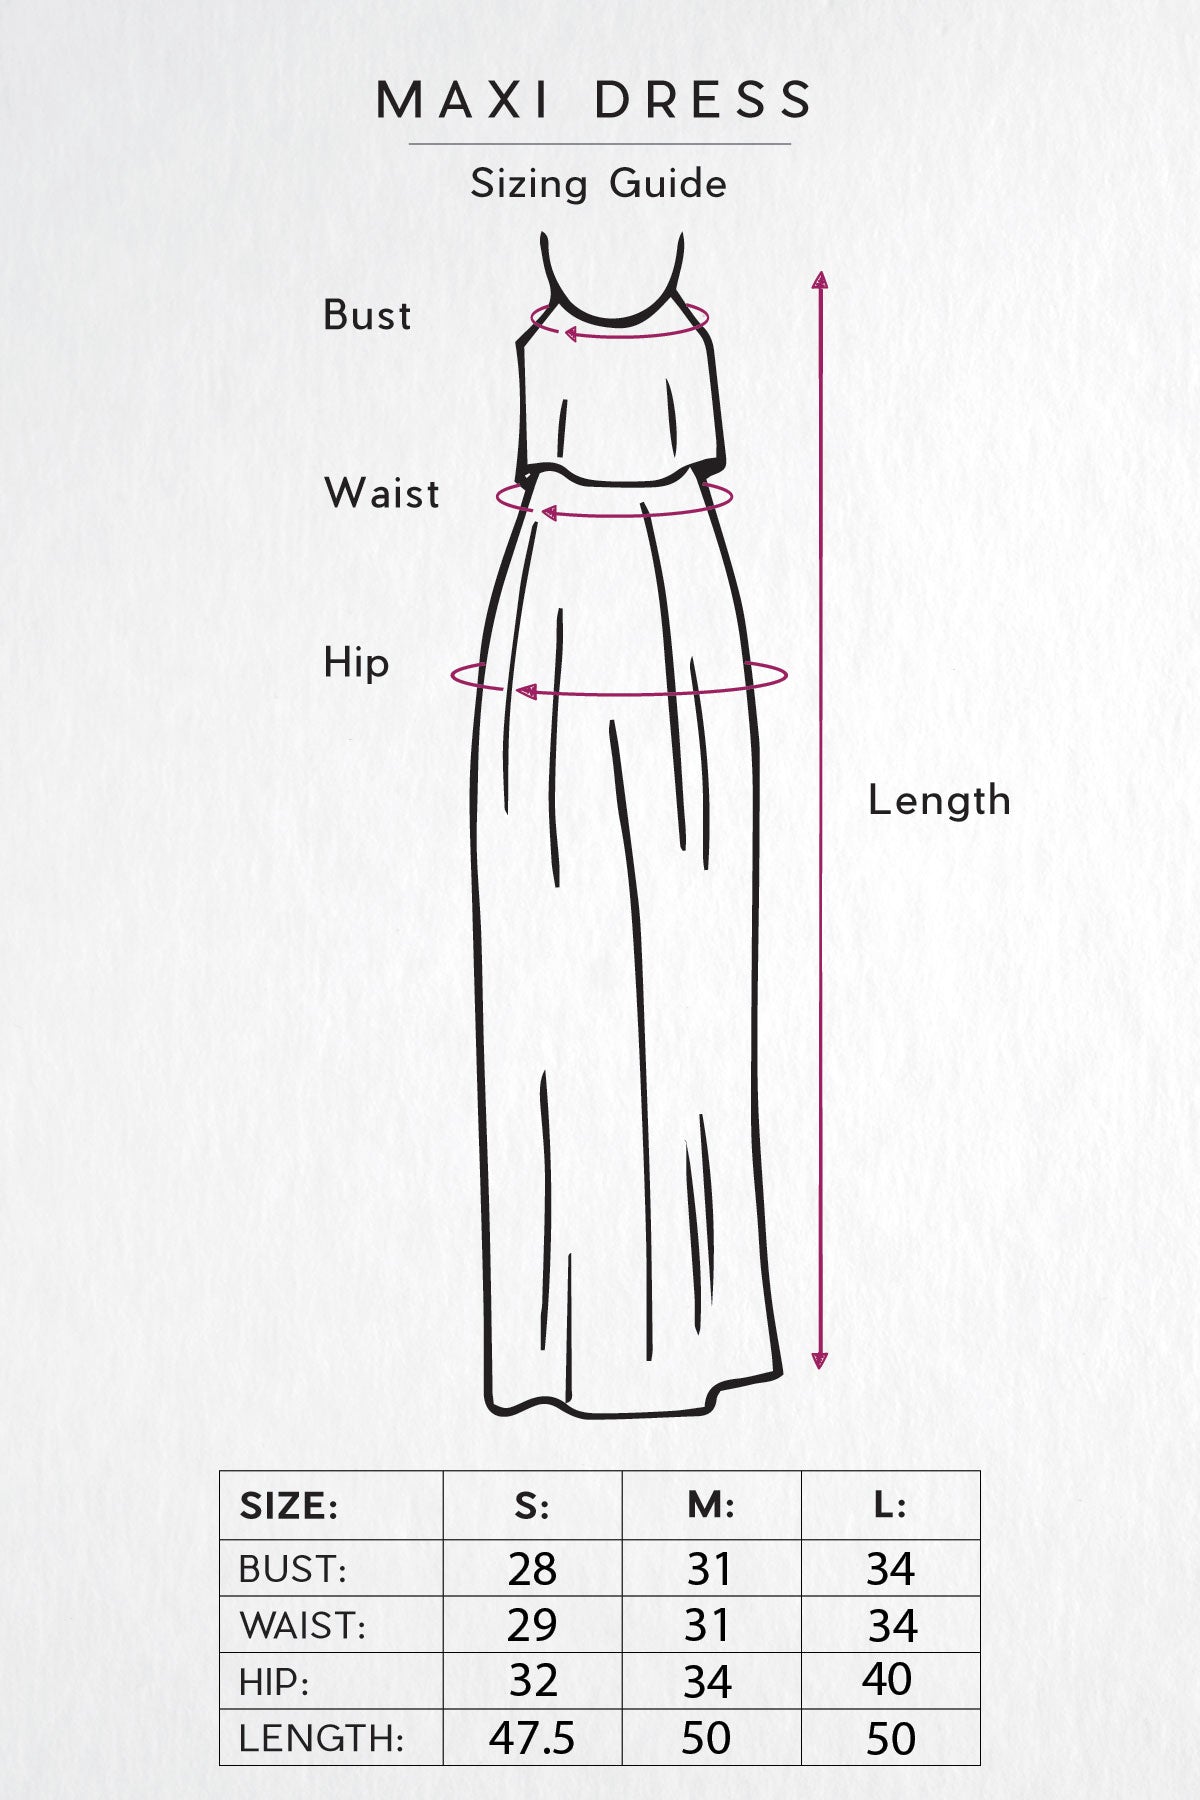 Maxi Dress Sizing Guide from Bella Ella Boutique.